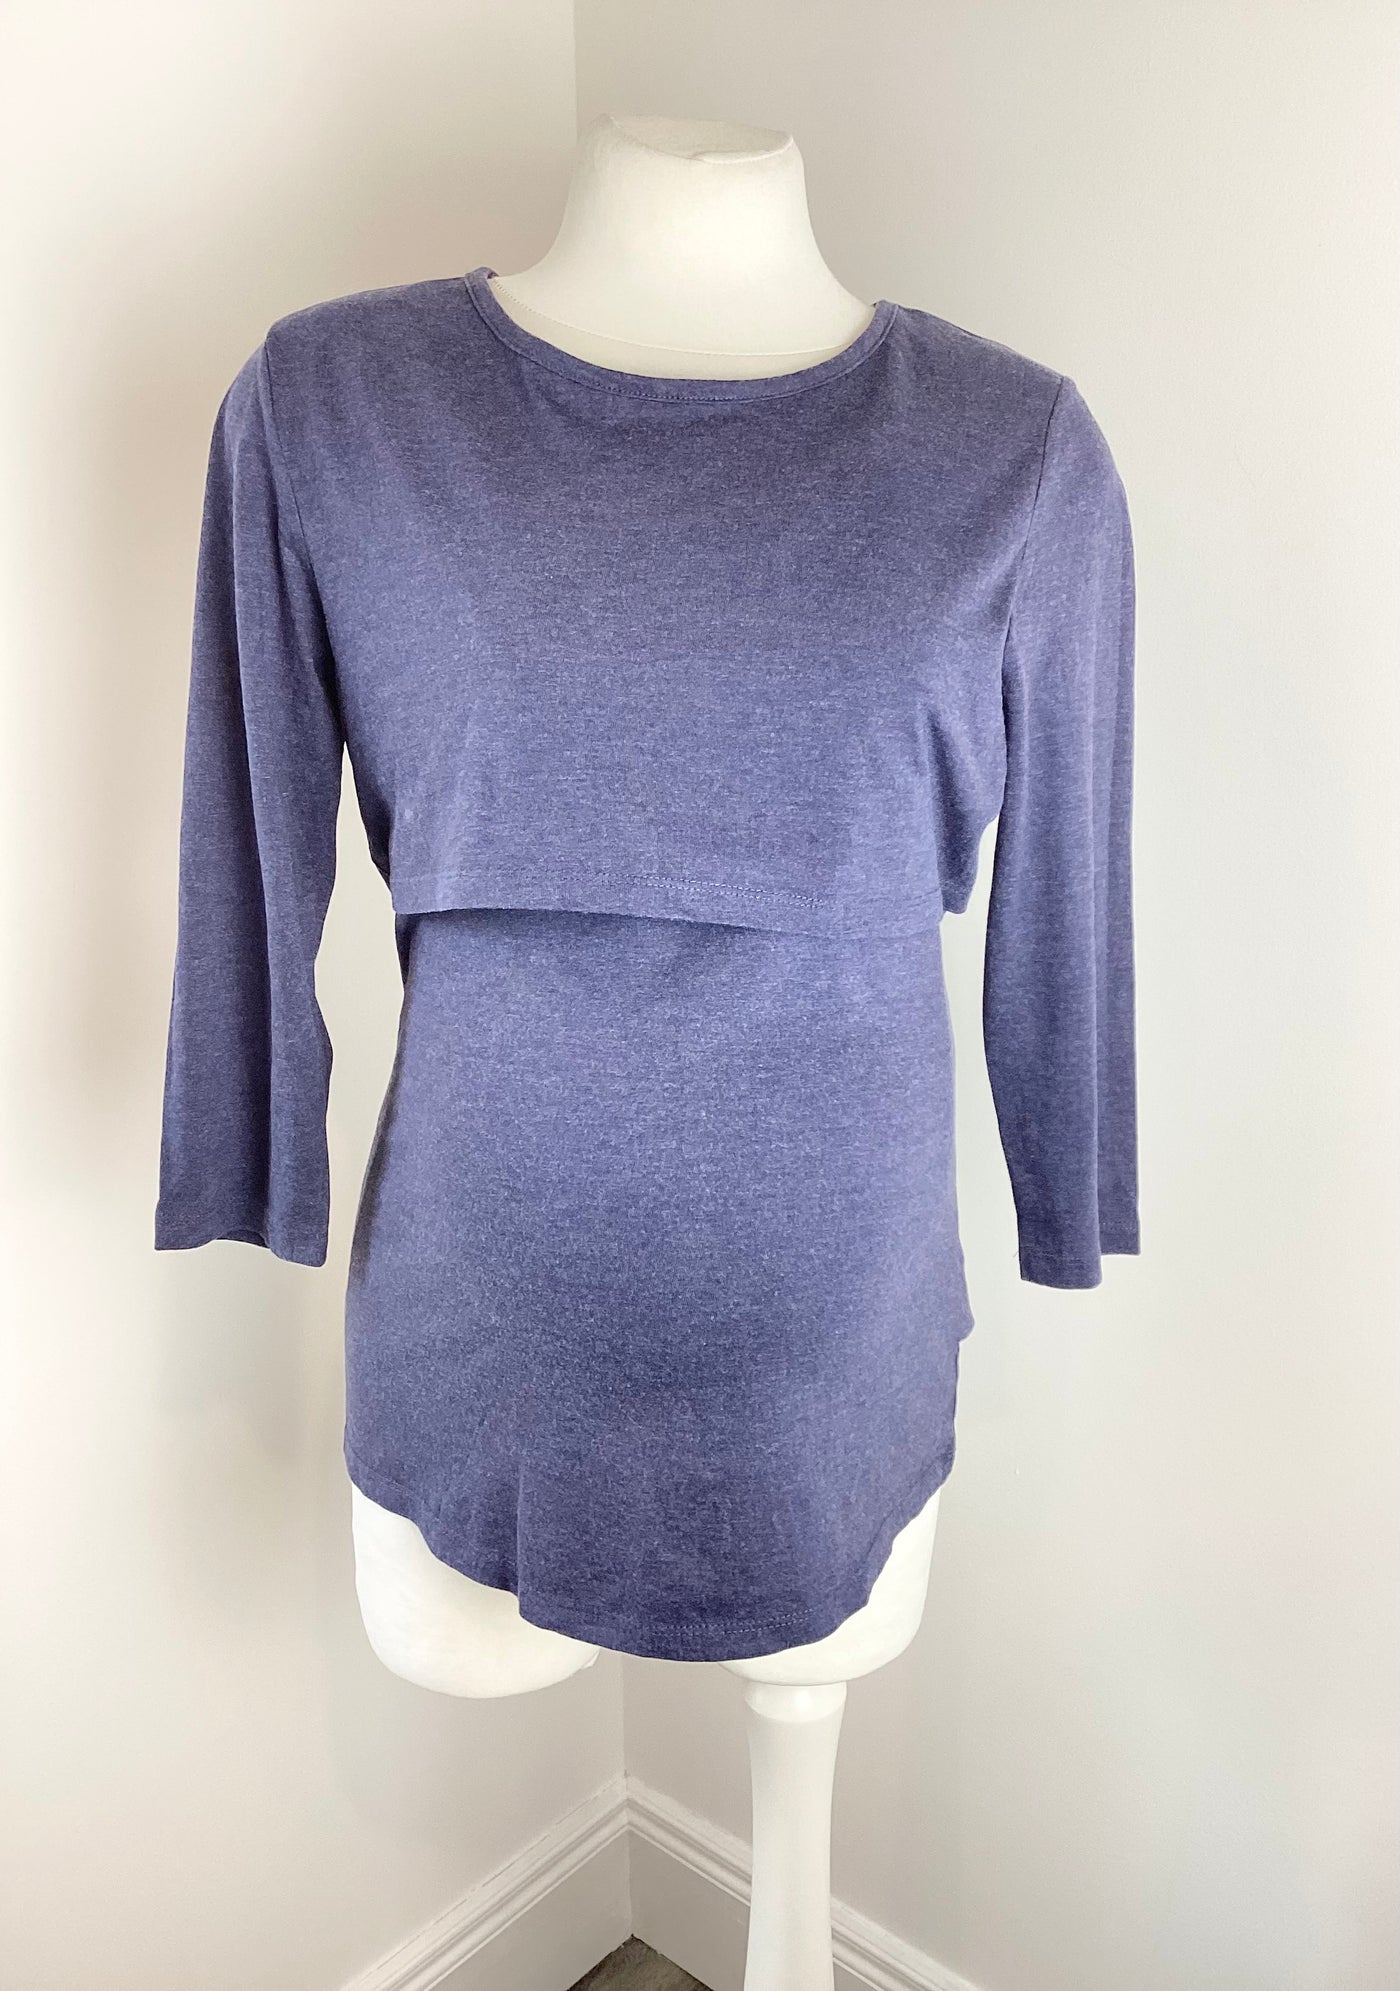 Blooming Marvellous navy 3/4 sleeve nursing top - Size M (Approx UK 10/12)